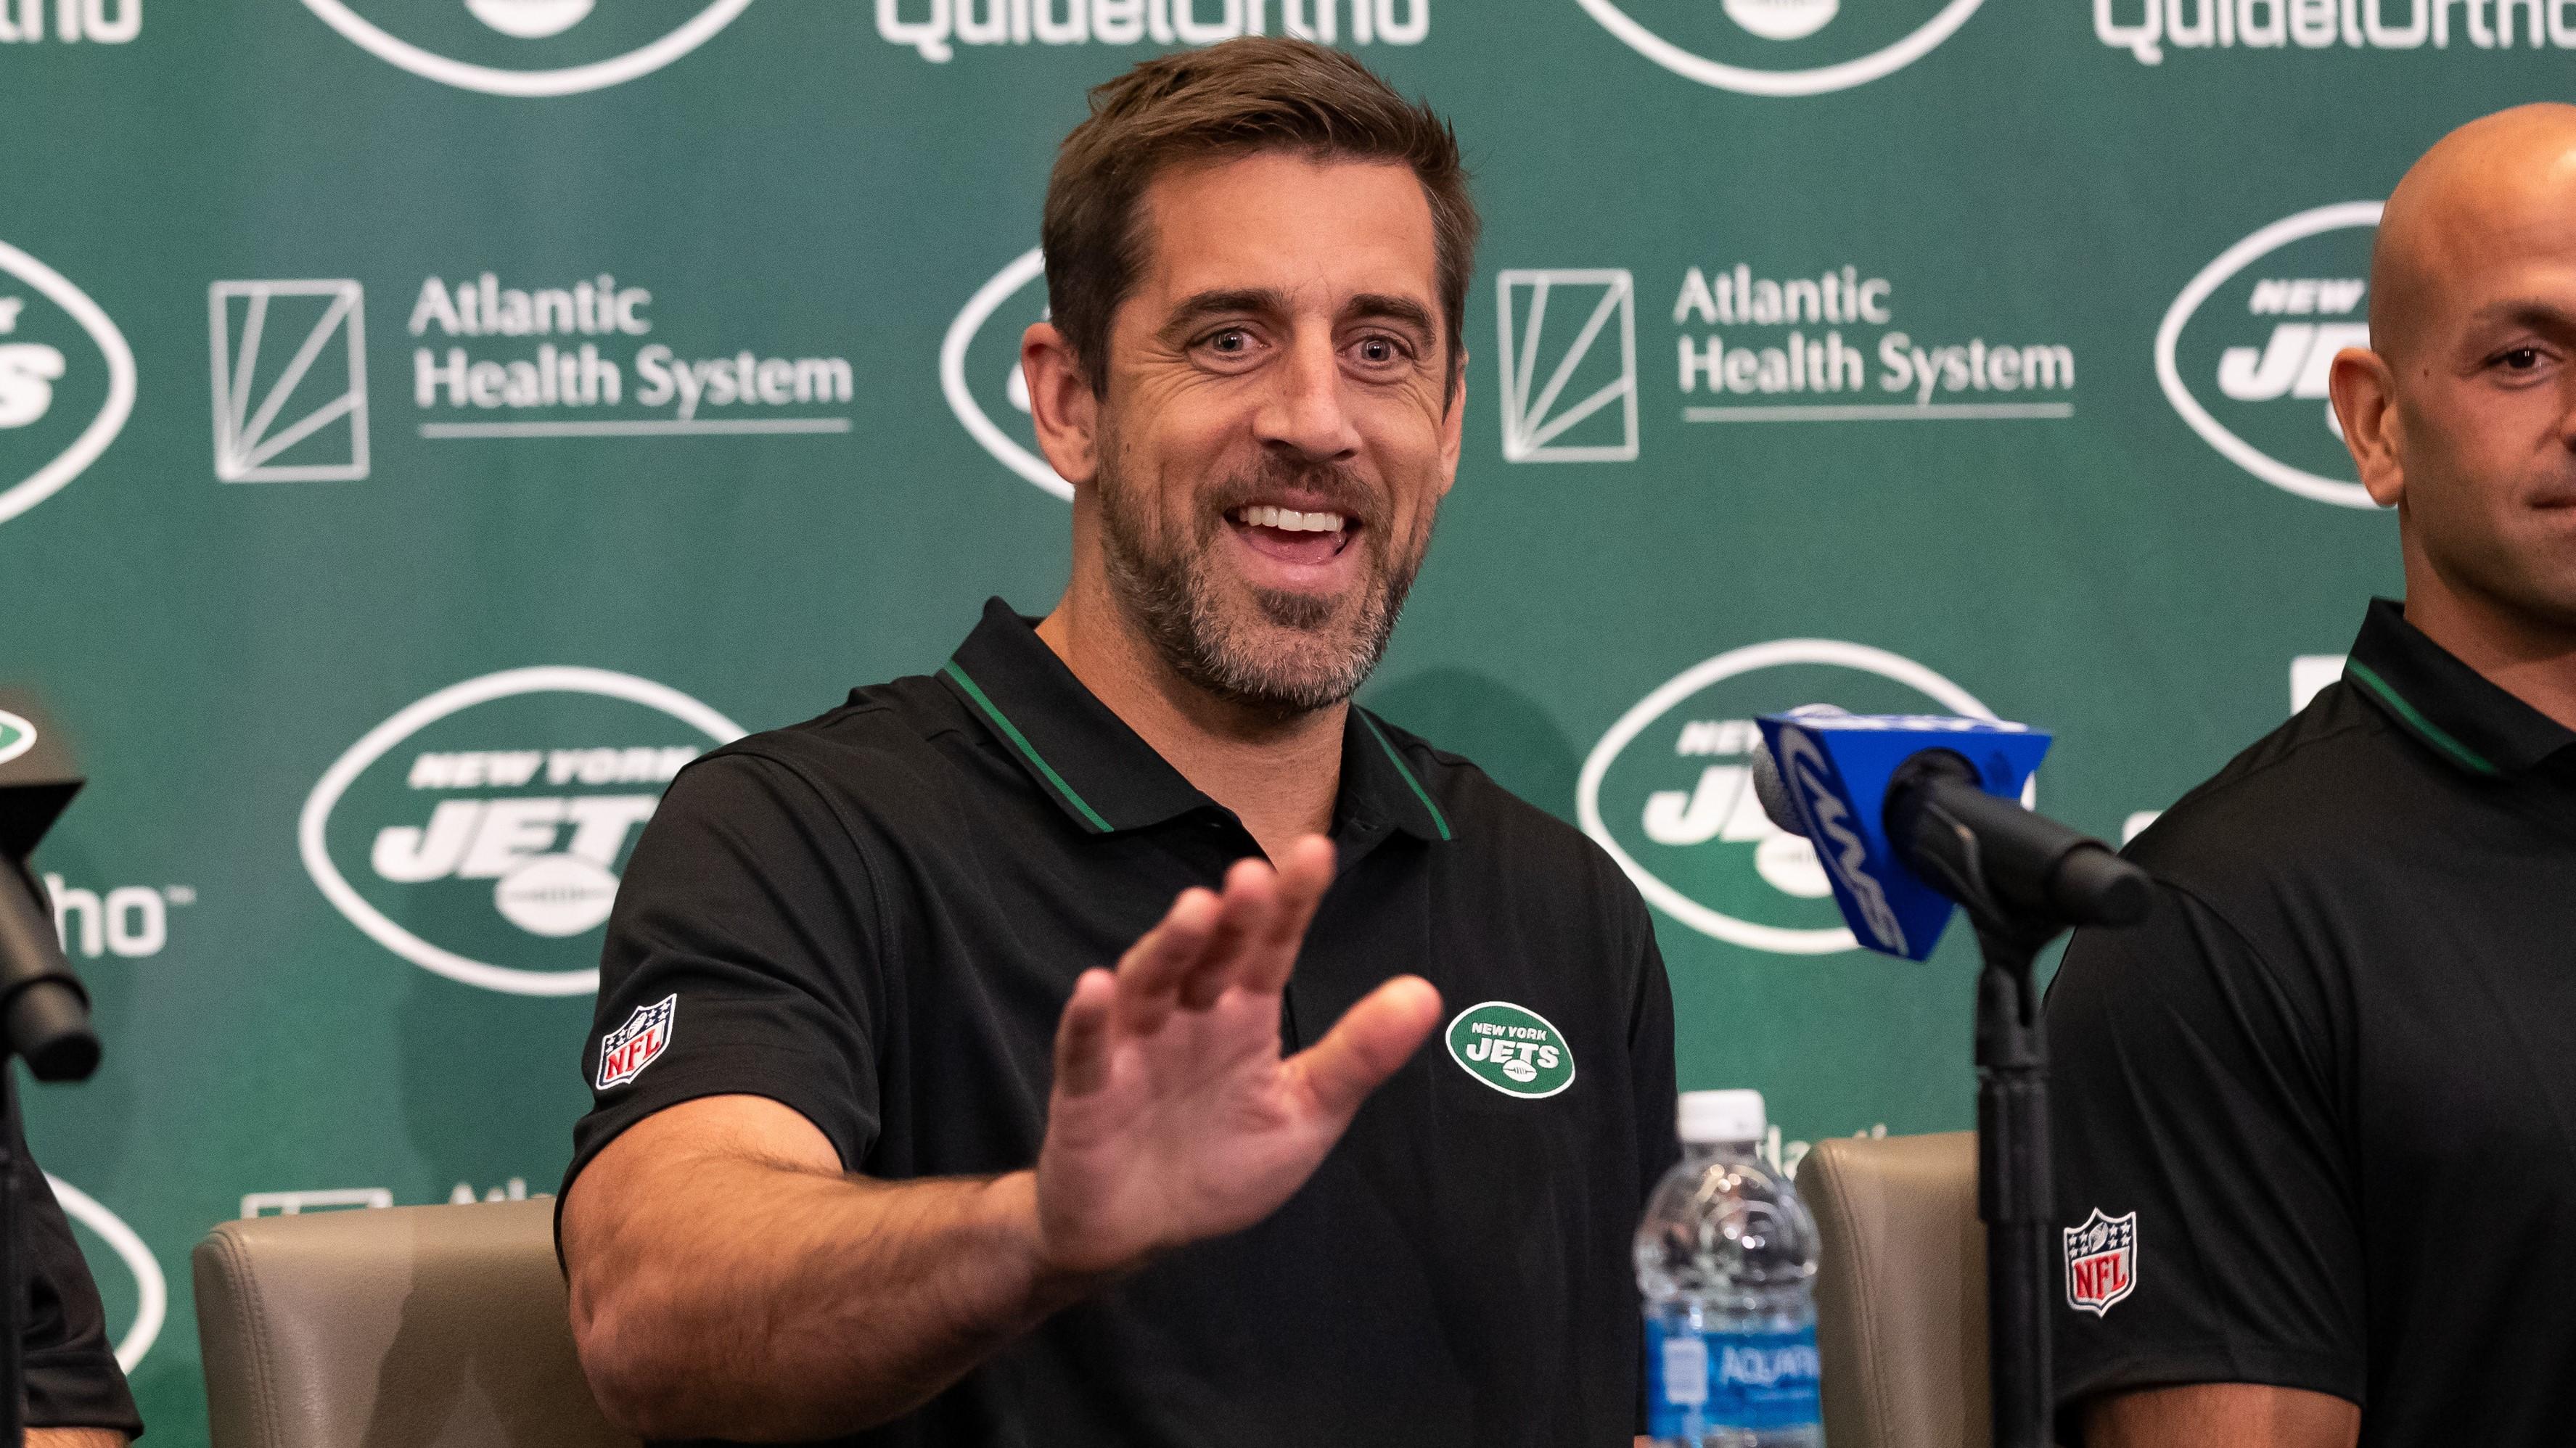 Aaron Rodgers waves to someone during his introductory news conference with the Jets. / Tom Horak-USA TODAY Sports